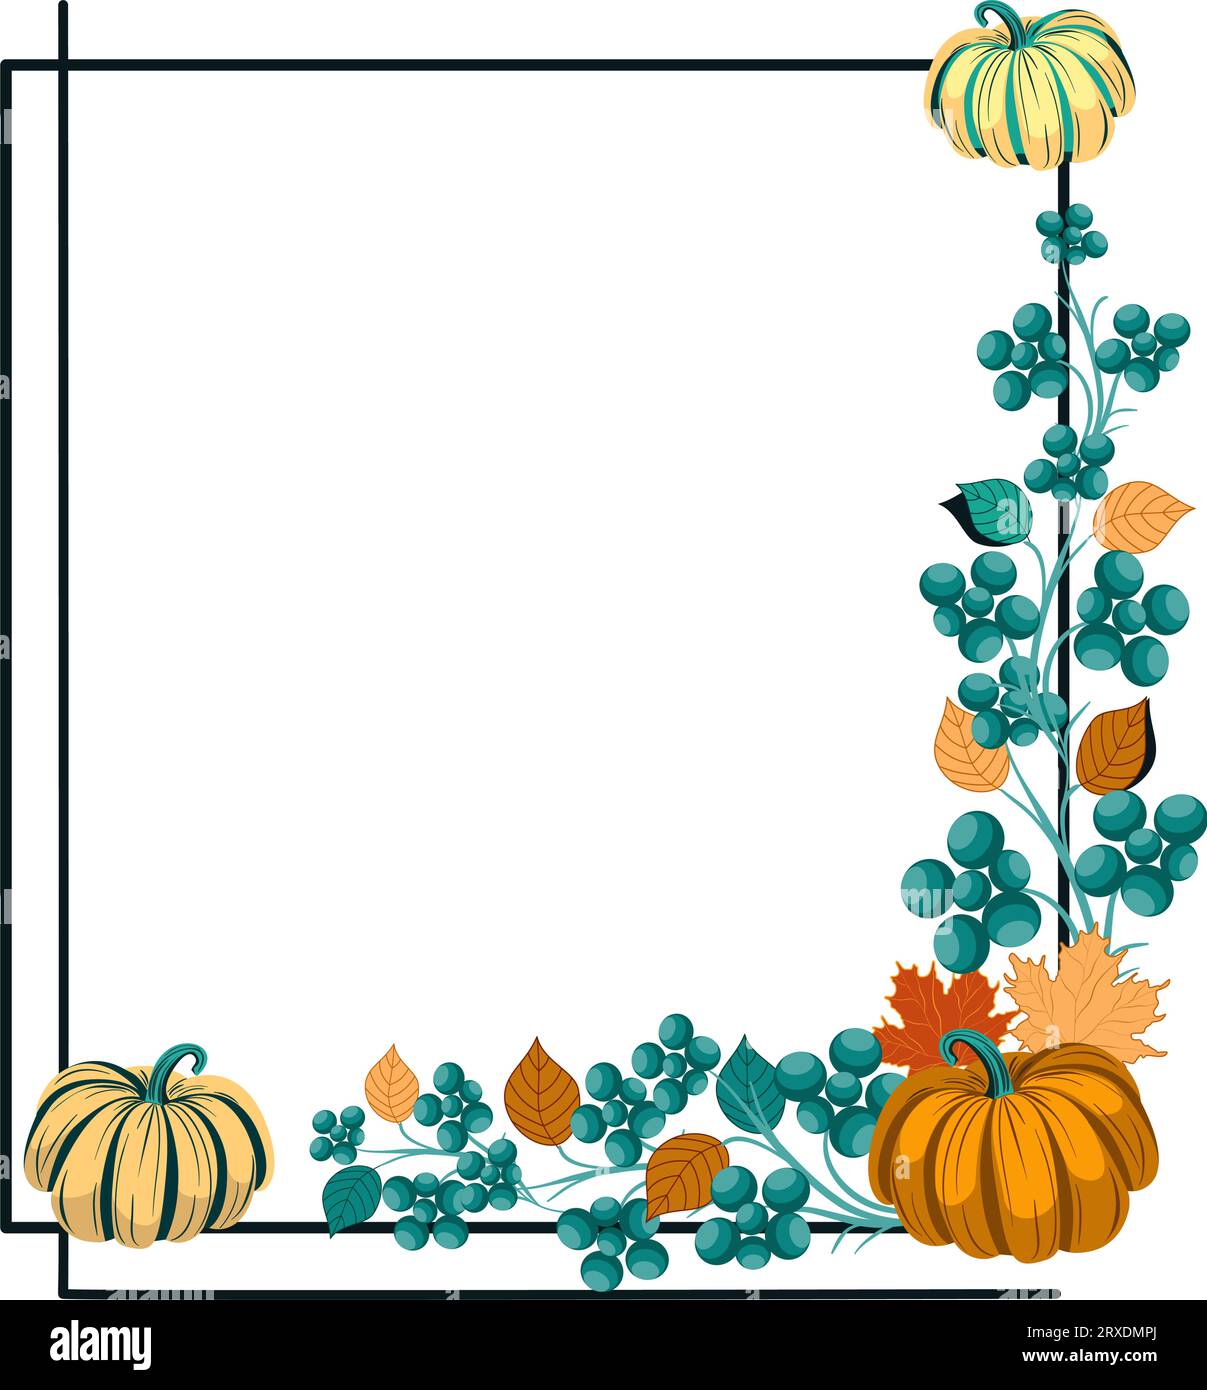 Autumn decorative frame with pumpkins and leaves Vector illustration Stock Vector